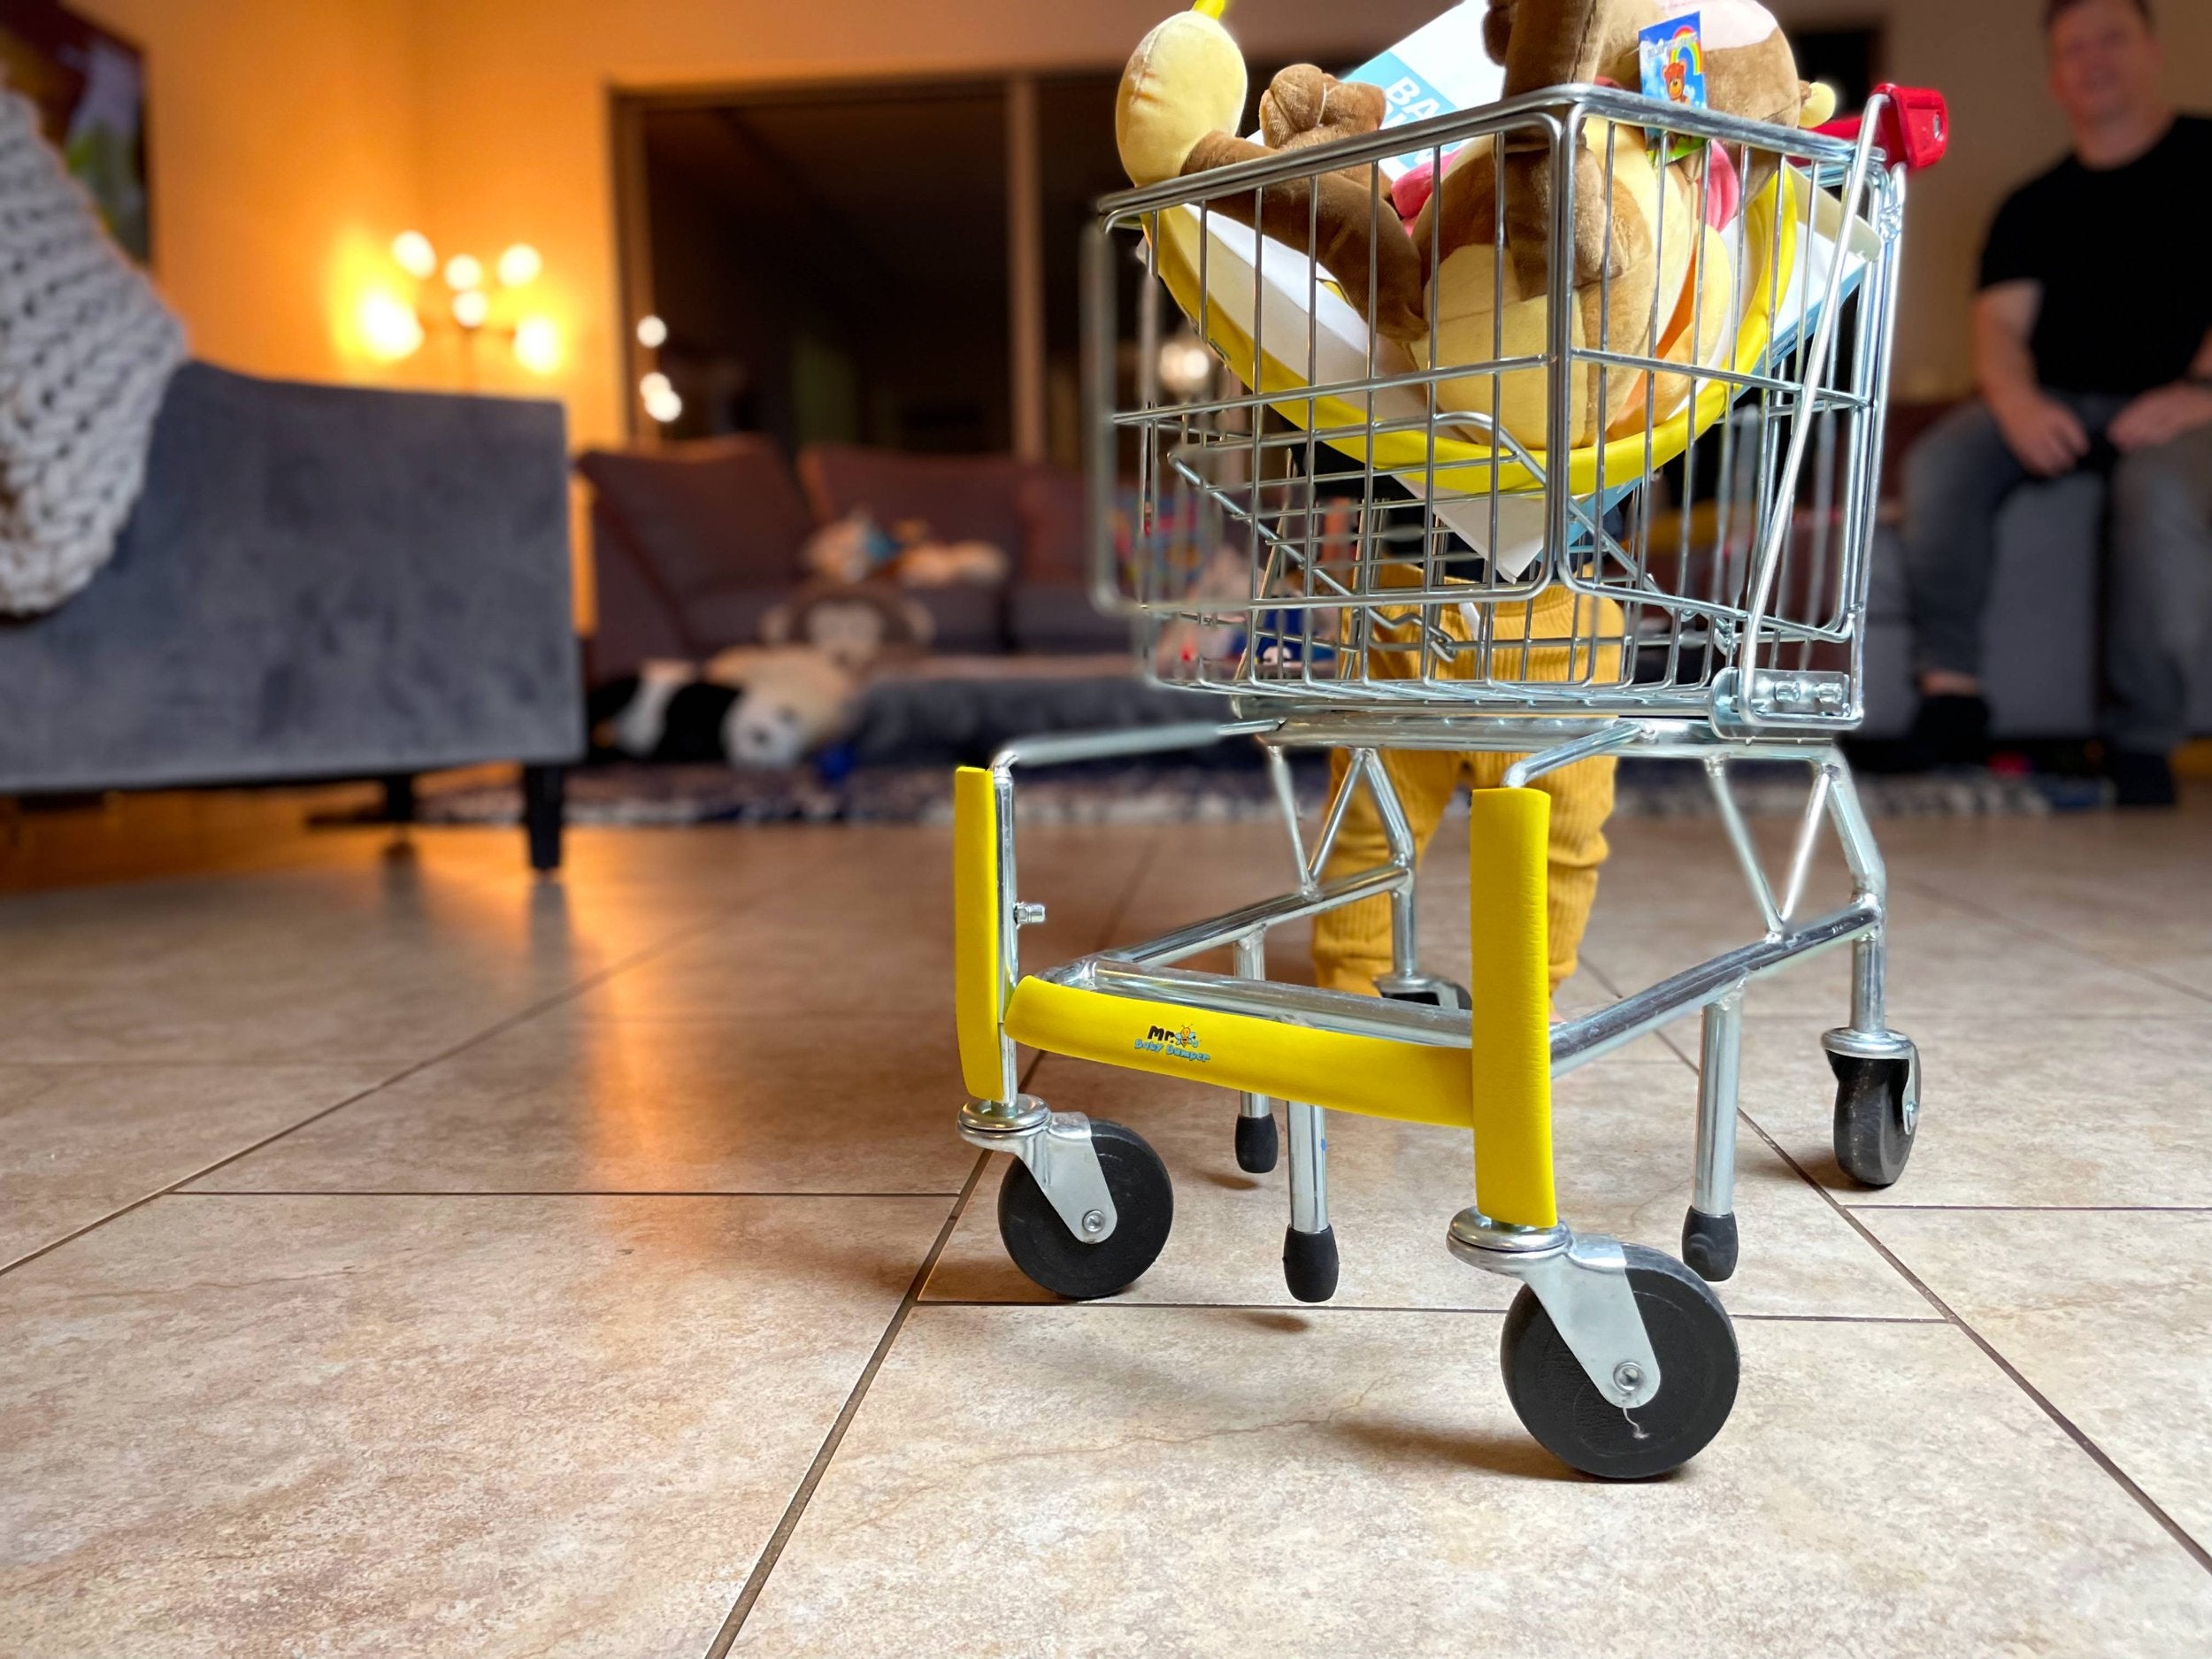 6 months old baby pushing a toy shopping cart that is wrapped with the yellow baby bumper and is filled with a stuffed animal. We see the Mr B's Baby Bumper logo on the front of the bumper and shopping cart.